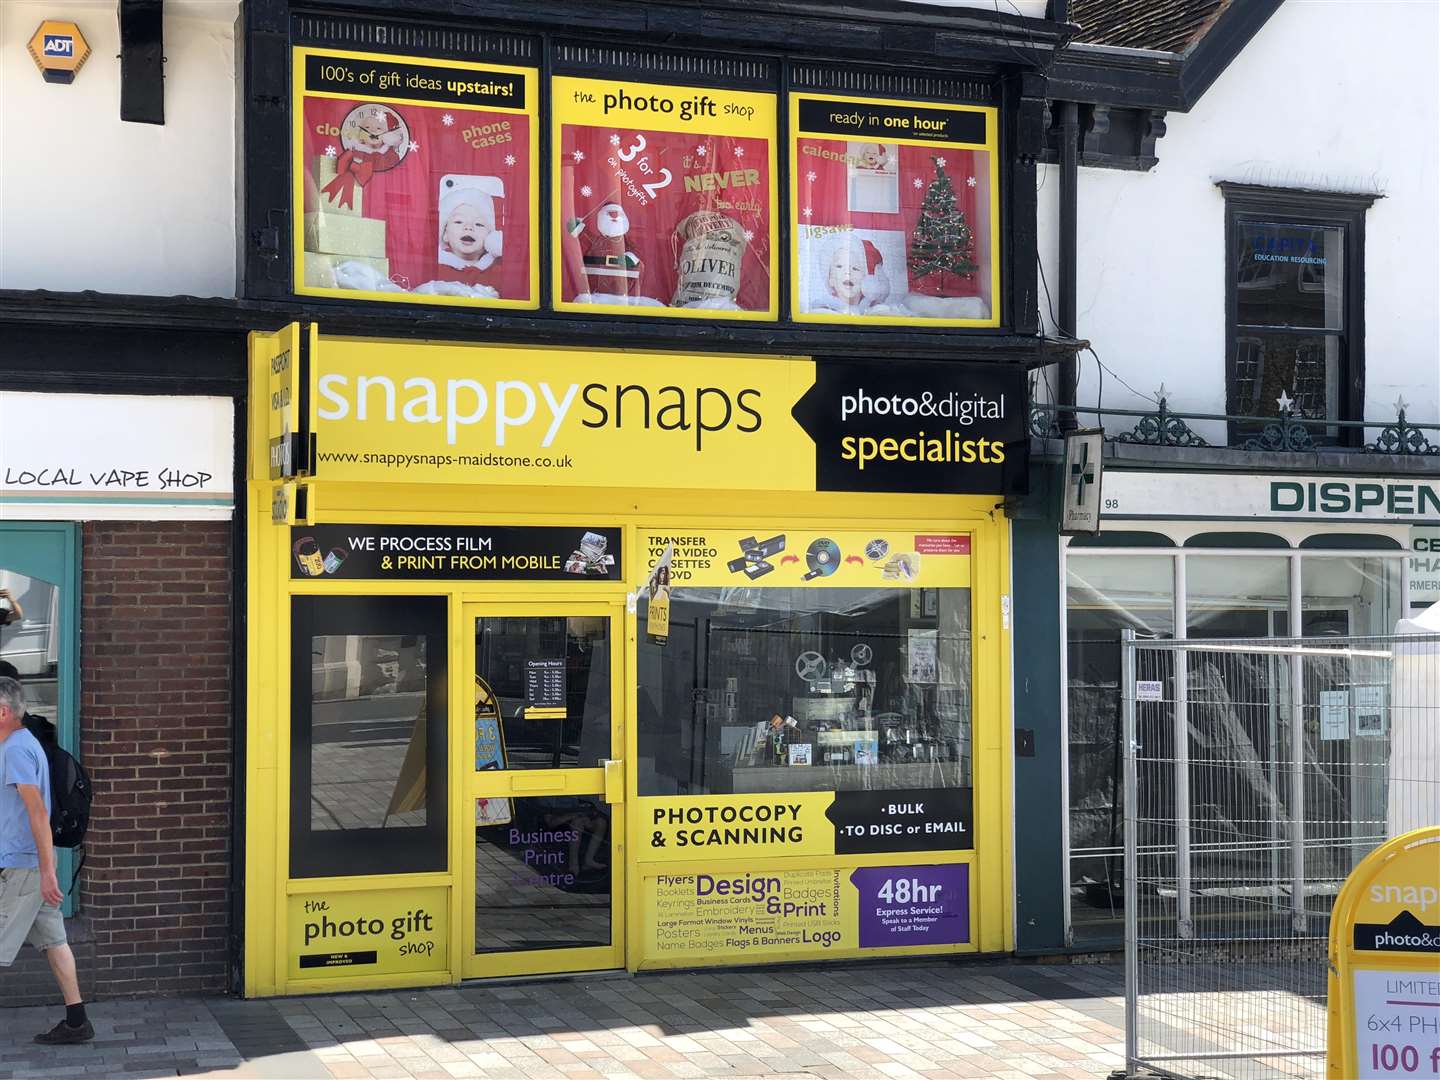 Snappy Snaps in Maidstone is already making preparations for Christmas (3402641)